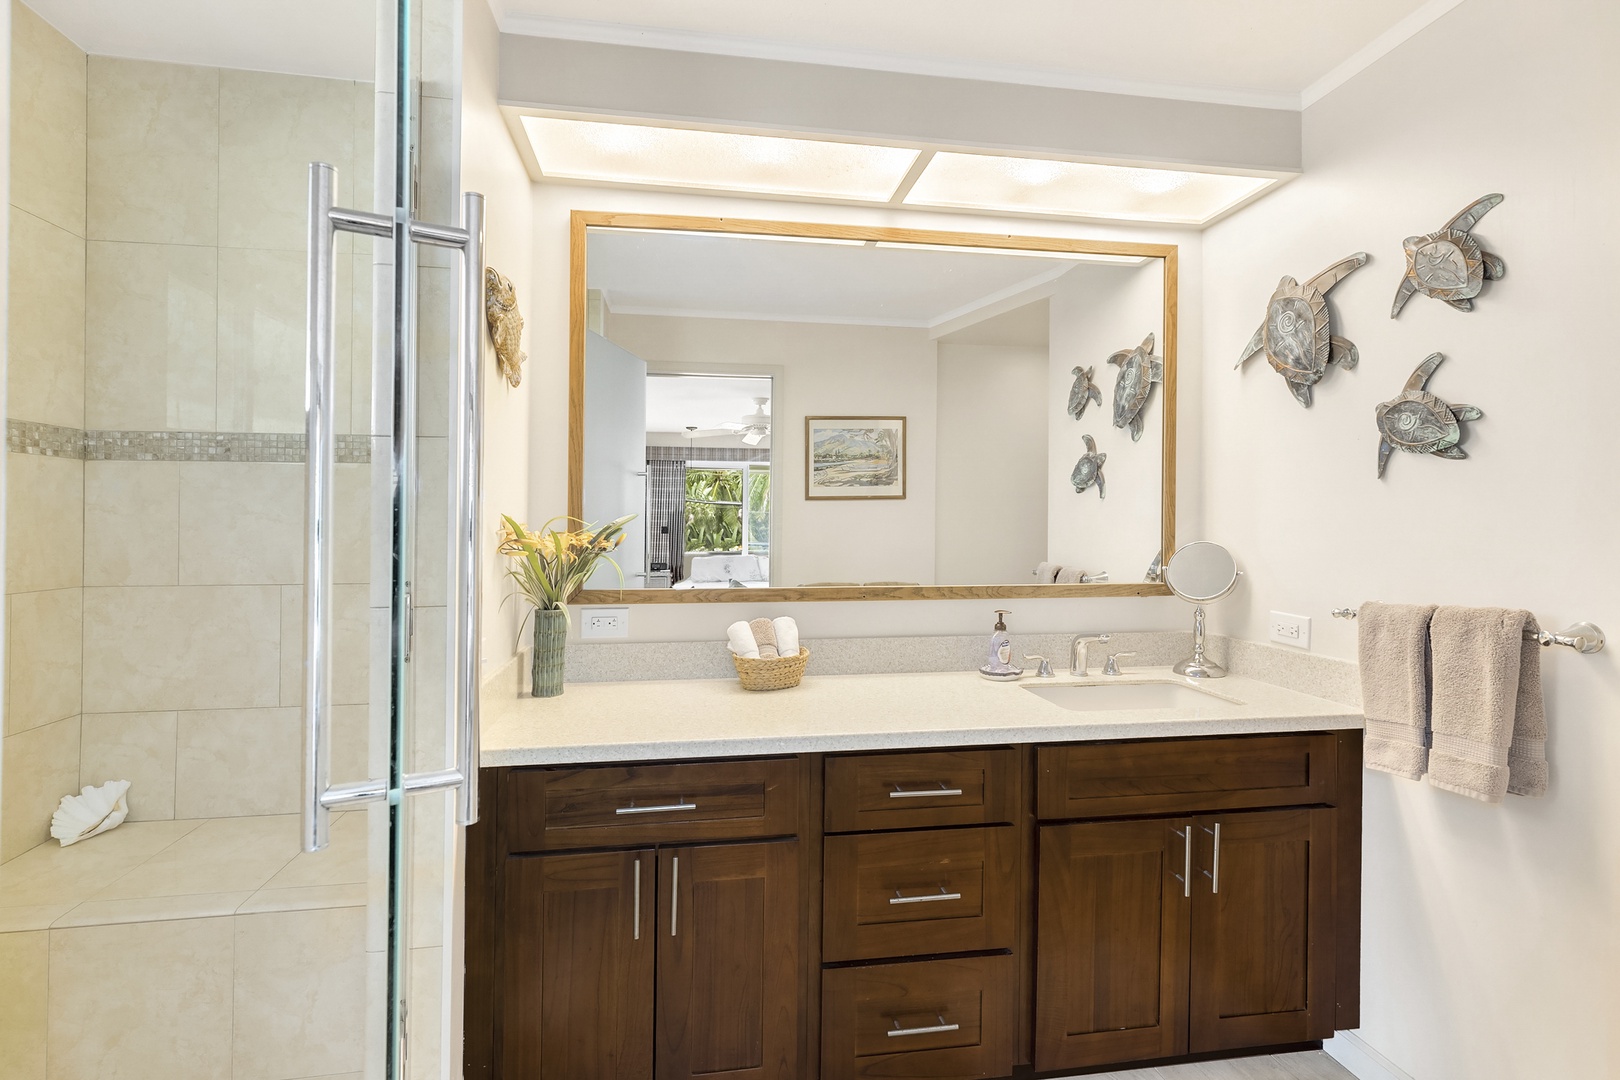 Haleiwa Vacation Rentals, Hale Kimo - Ensuite bathroom has a stand-up shower and plenty of storage.